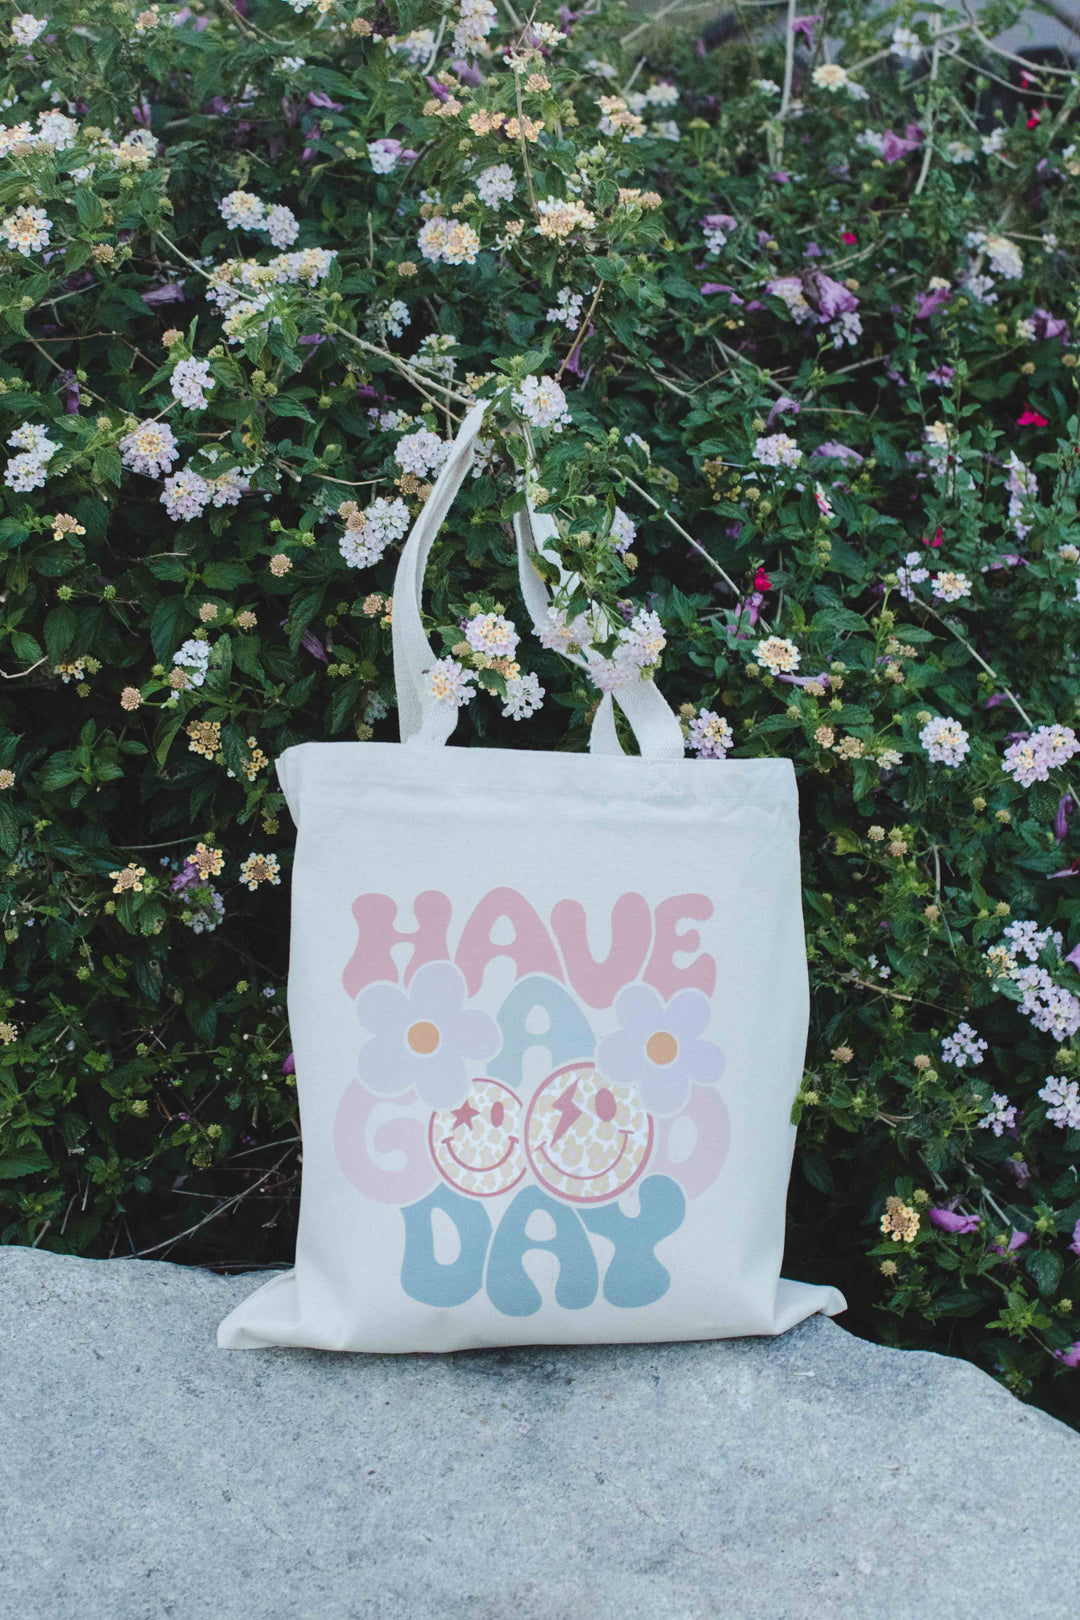 Have a Good Day Tote Bag